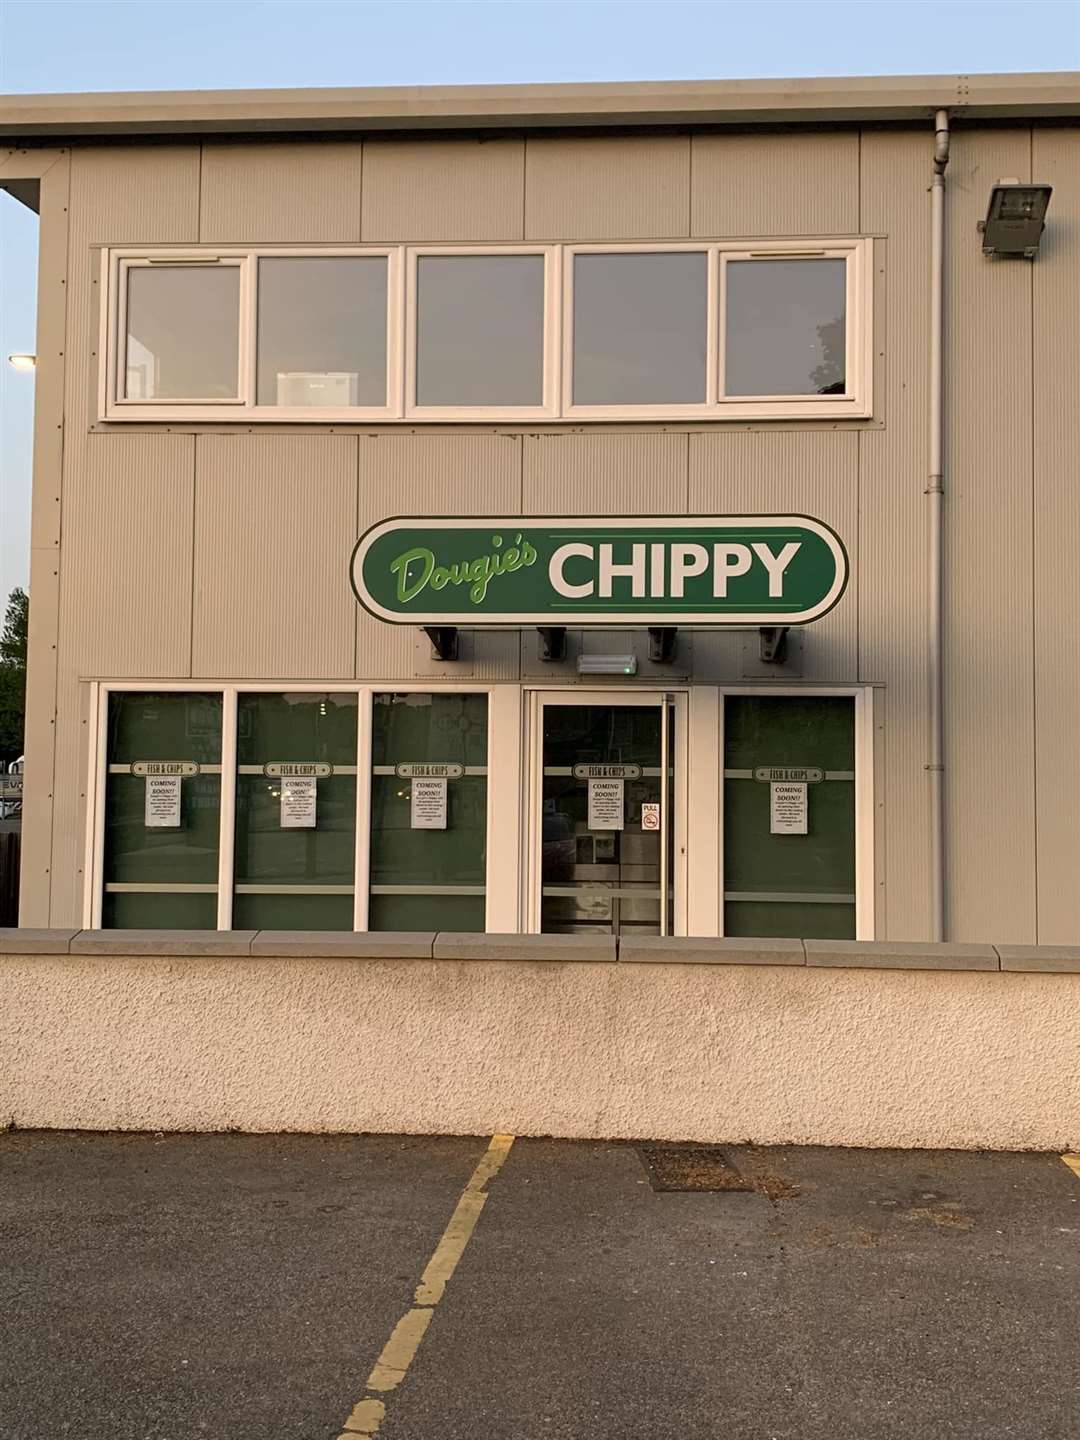 Dougie's Chippy is set to open tomorrow, June 1.